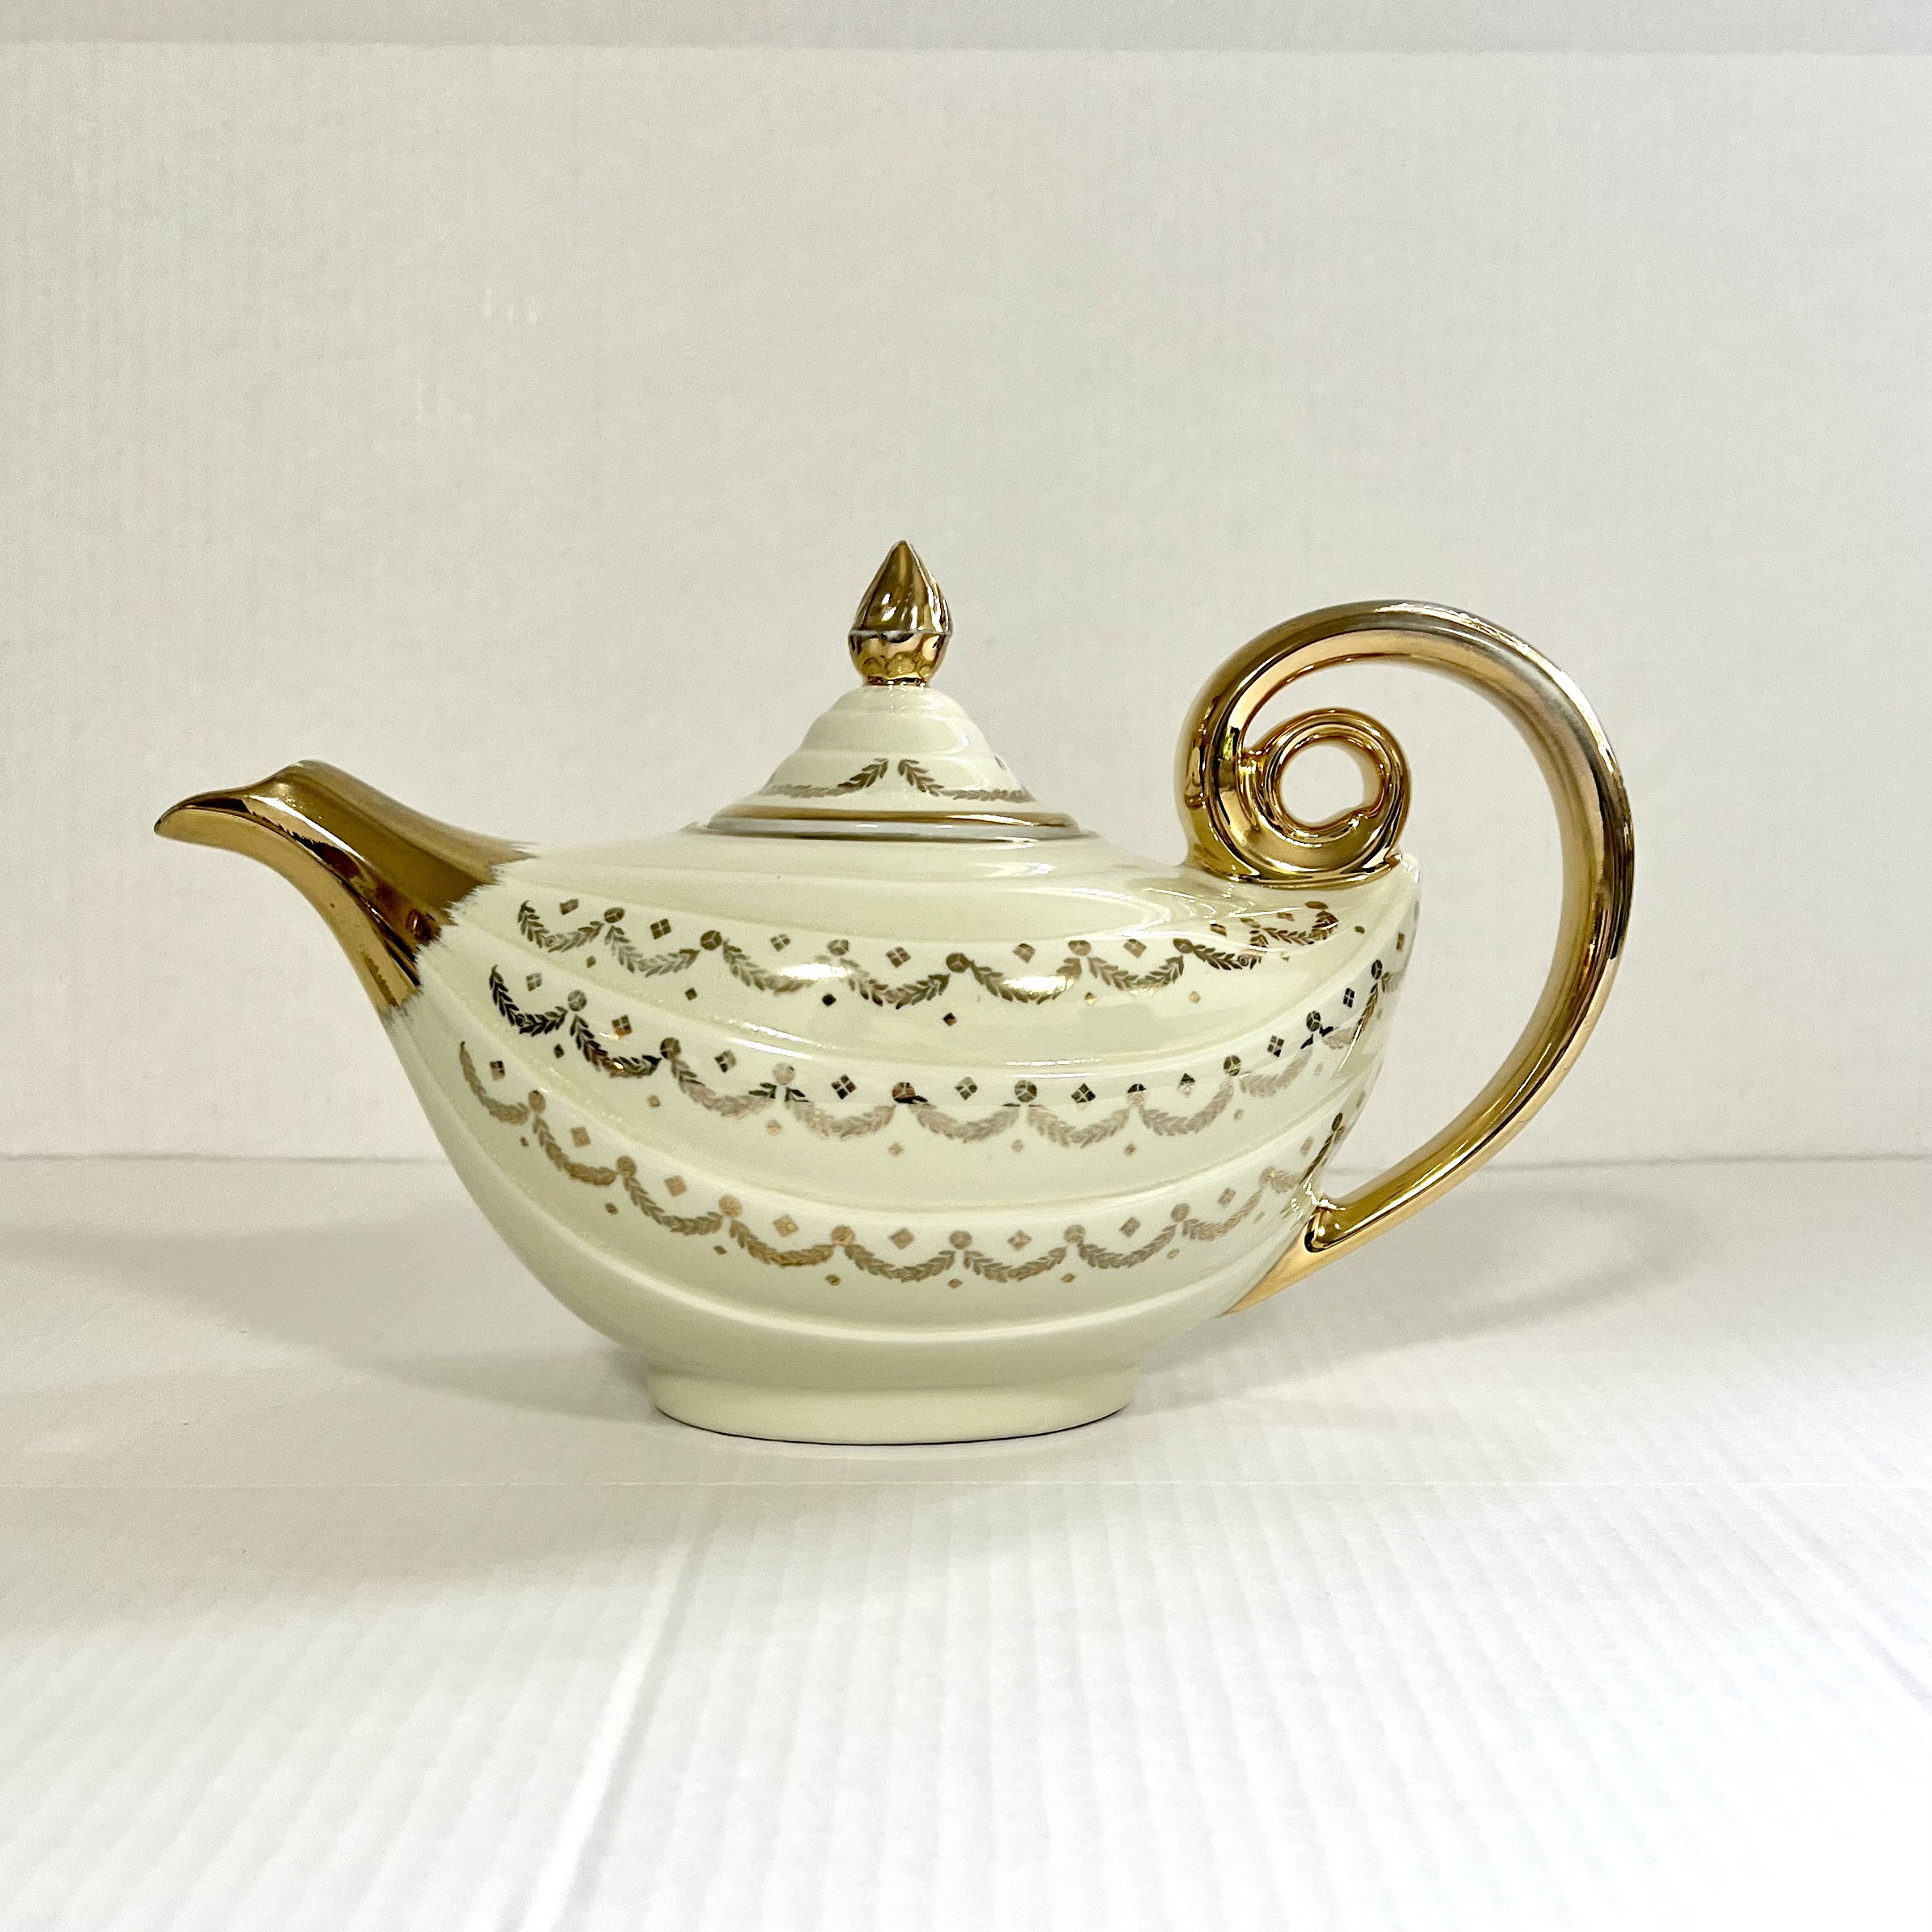 Mariage Frères Art Deco Large Insulated Teapot